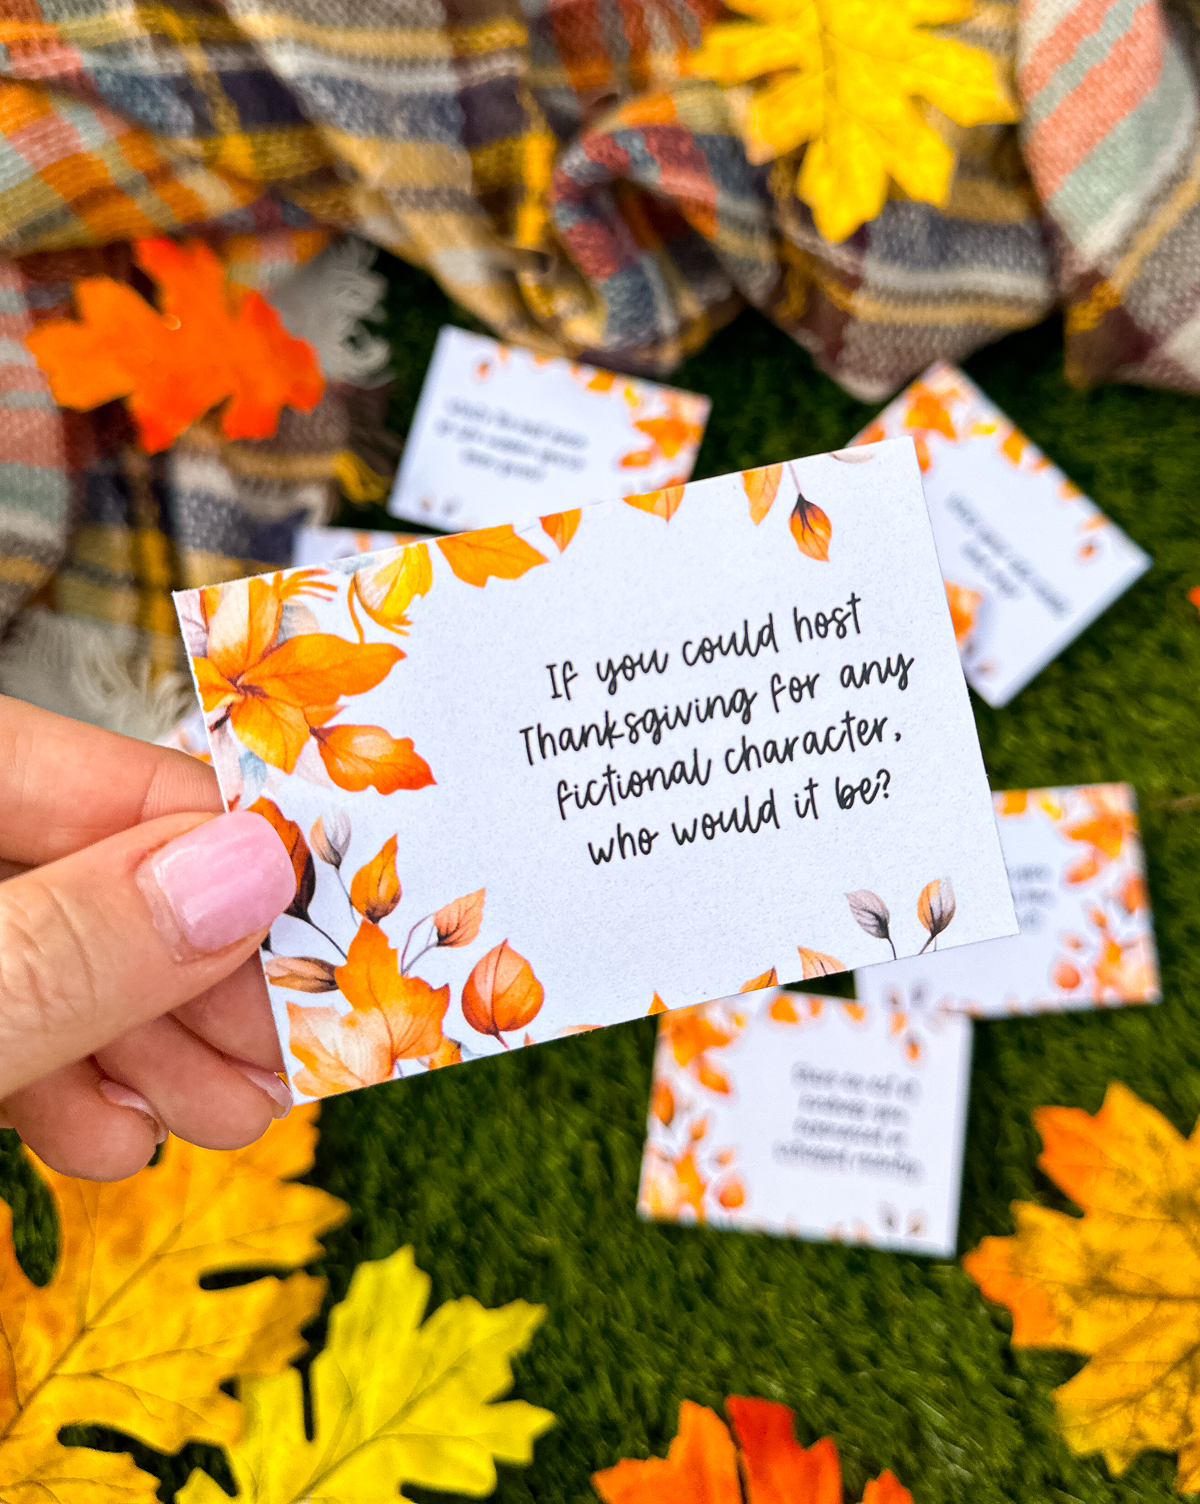 Make Every Moment Count This Thanksgiving! Dive into our list of 50 conversation starters to enrich your holiday gathering with laughter and reflection.